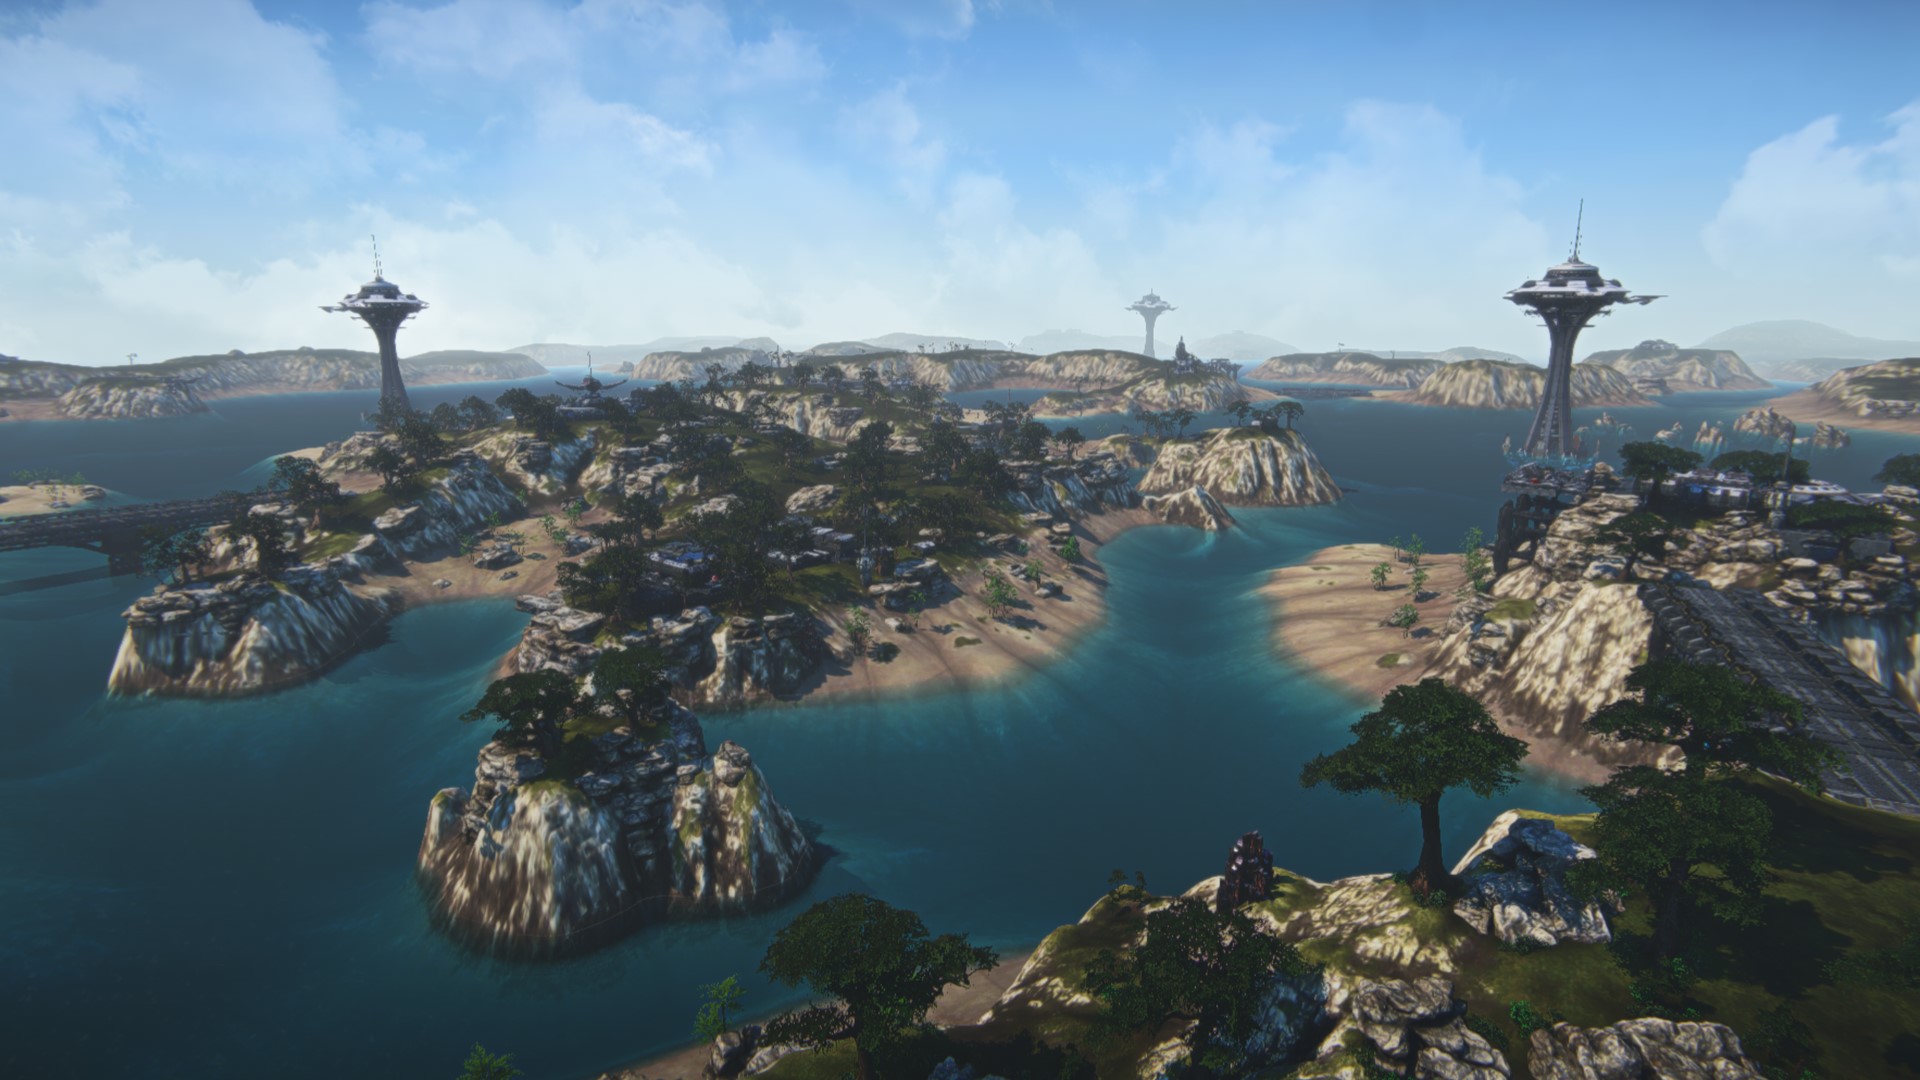 PlanetSide 2 just got a new continent to explore for the first time in 8 years